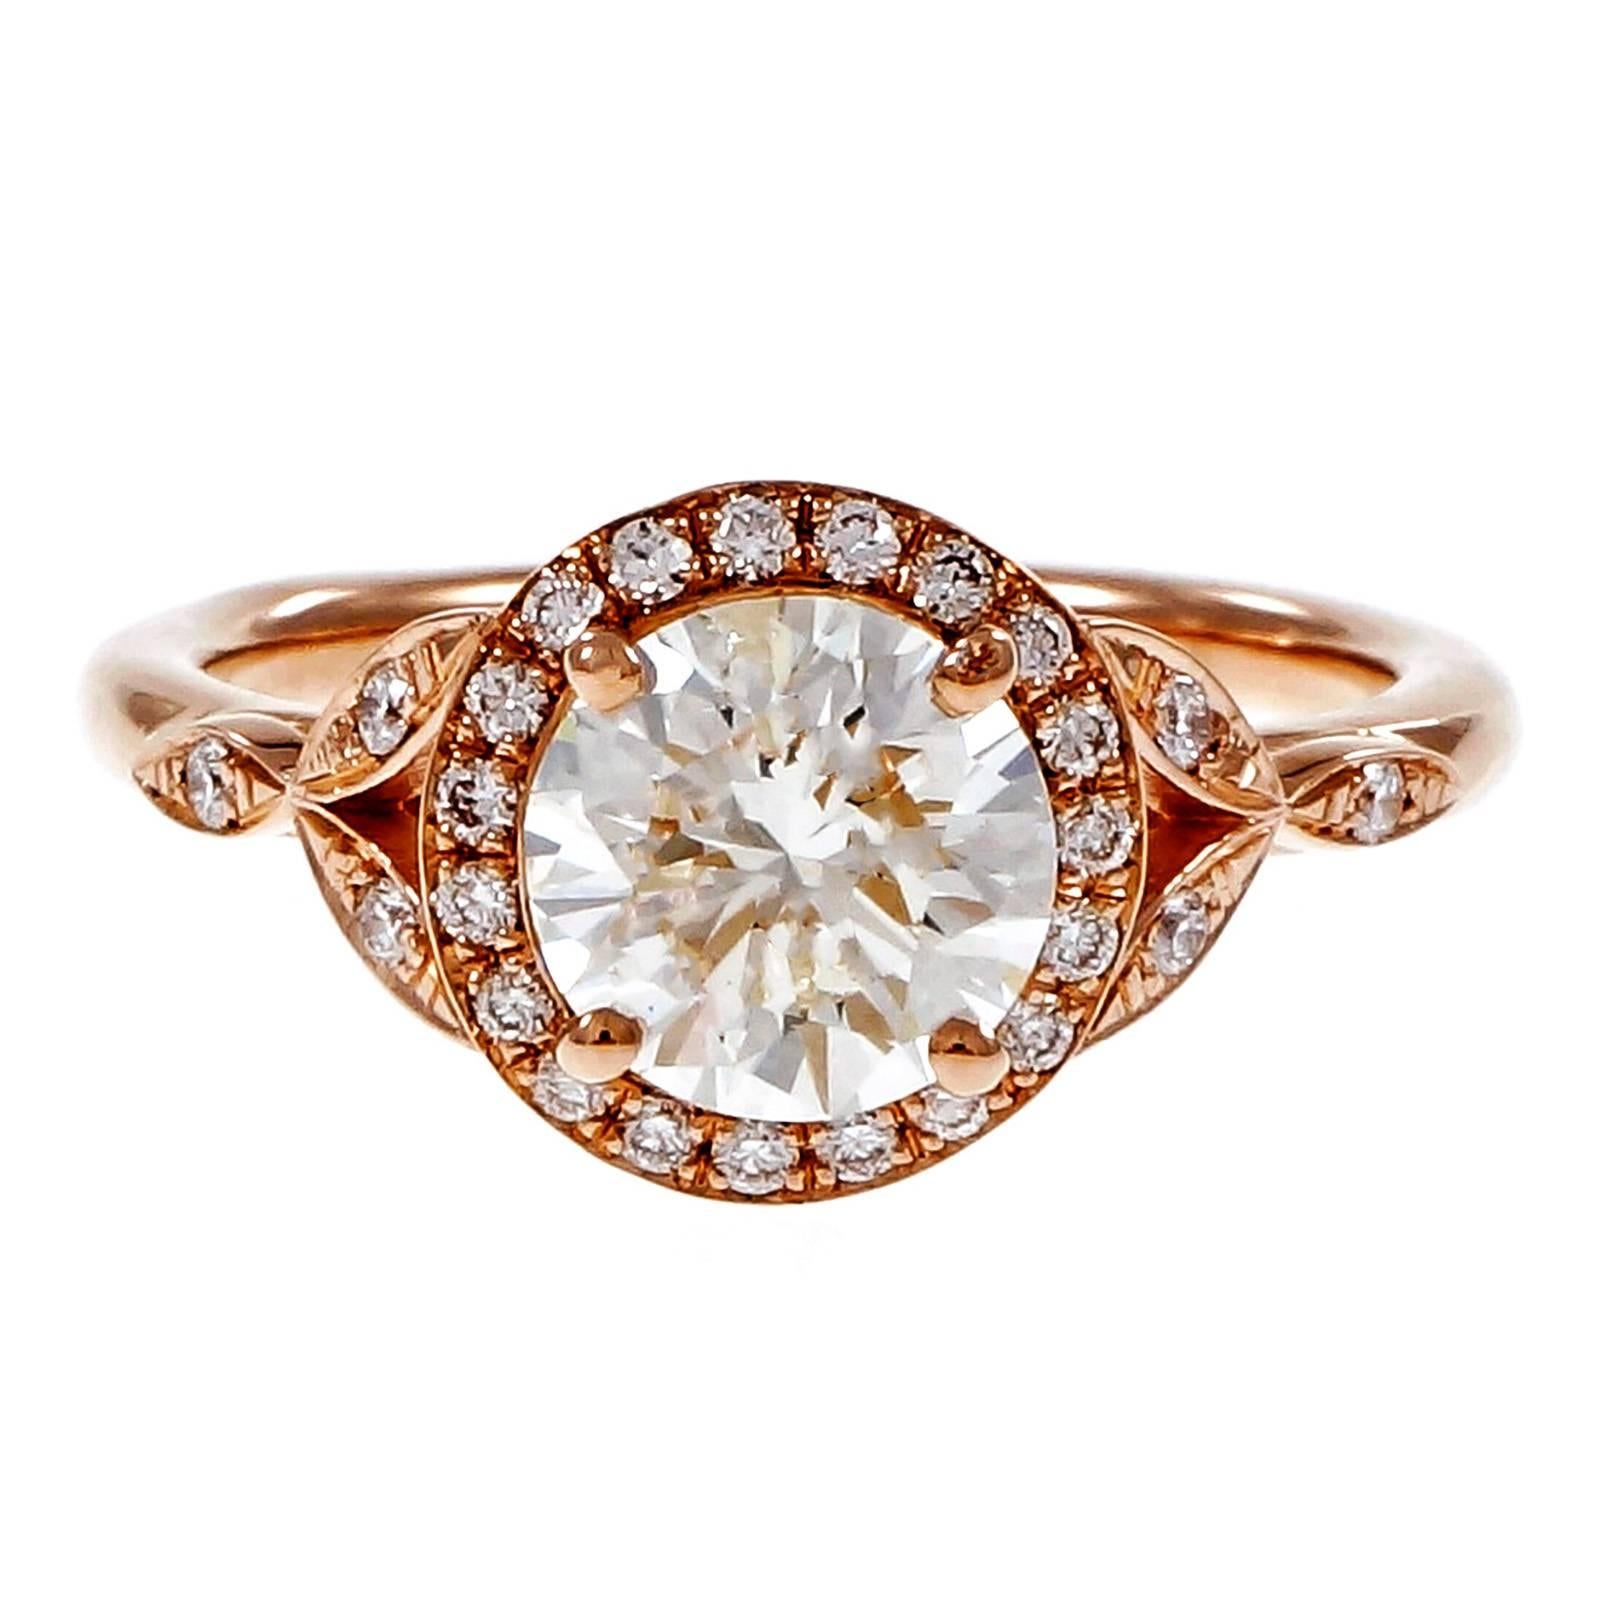 Peter Suchy 14k rose gold round halo engagement ring with antique style sides designed to fit flush with a wedding band. GIA certified. 

1 round diamond, approx. total weight 1.37cts, J, SI2, GIA certificate #1162654836
25 round full cut diamonds,